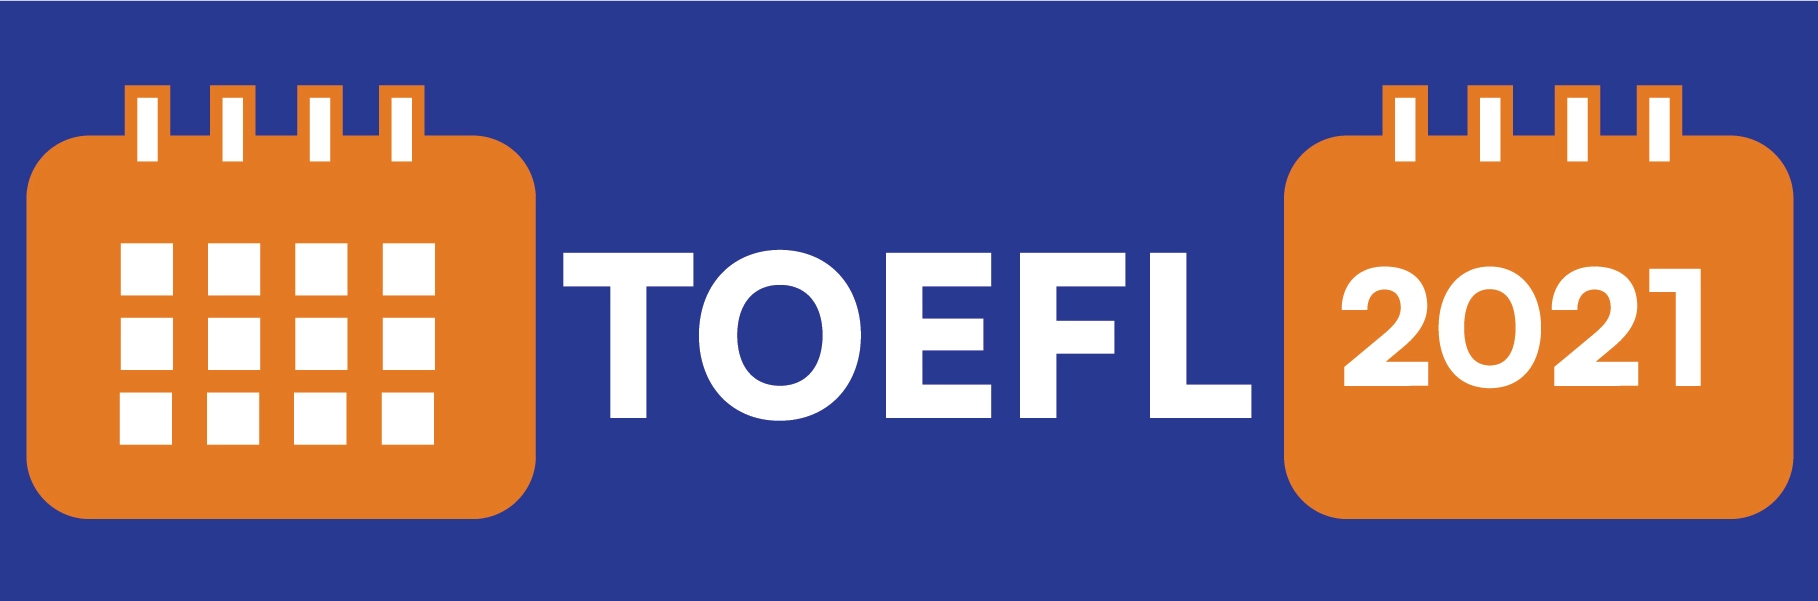 TOEFL Exam Dates 2021 & Test Centers: Find Out the Available TOEFL Exam Dates in 2021 Image